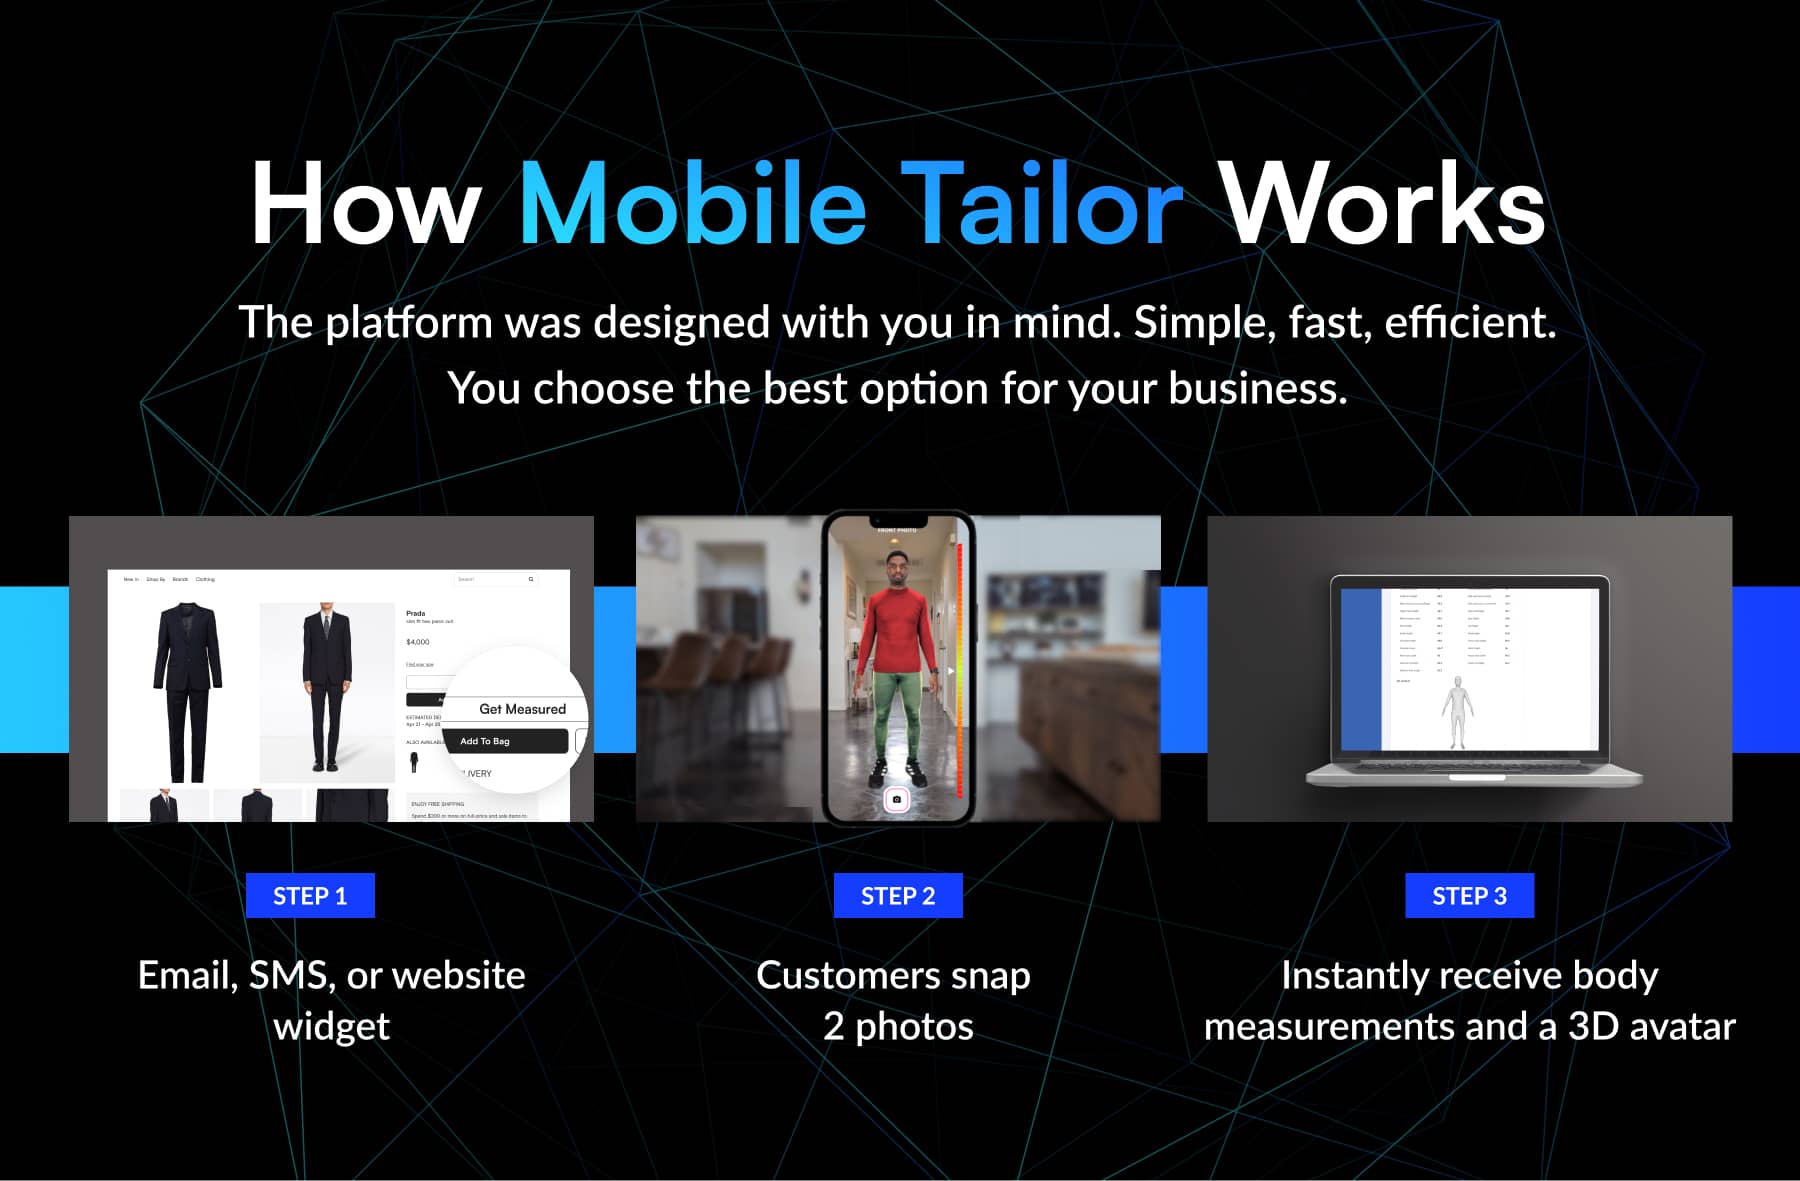 Learn how a mobile tailor utilizes virtual body measurements and mobile body scanning technology to provide customized clothing, while also optimizing their online presence through SEO strategies.